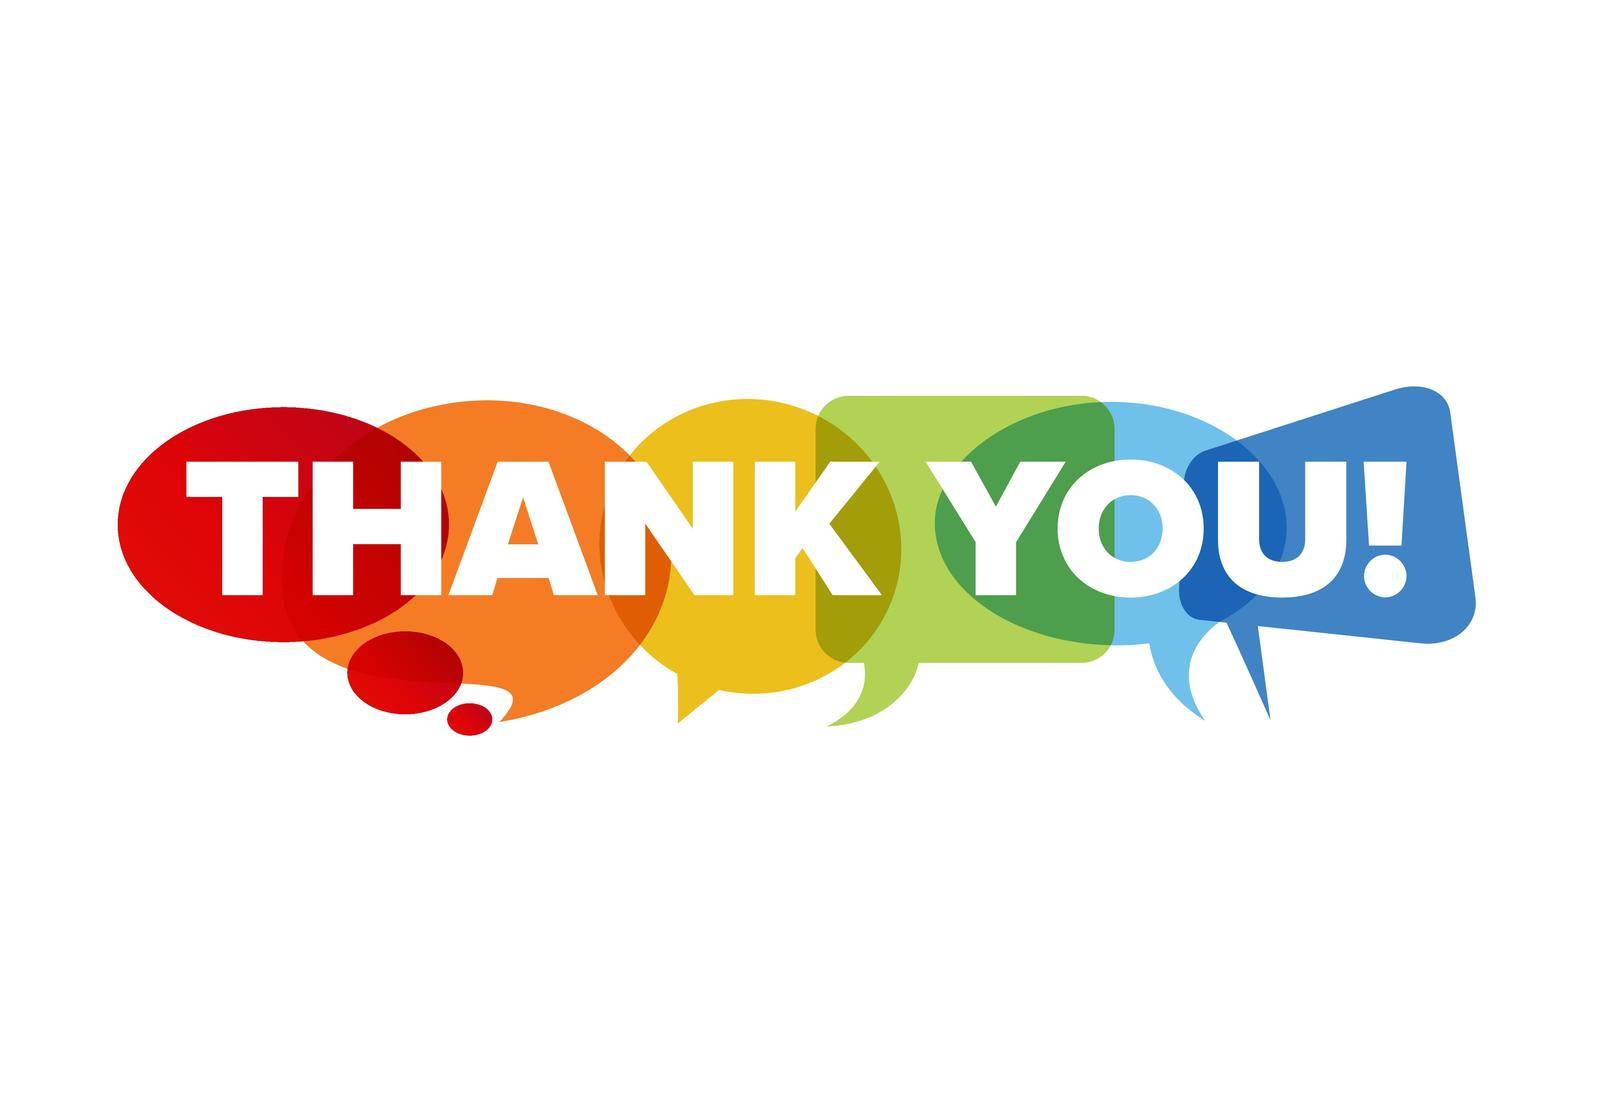 Thank you lettering template made from speech bubble by orson